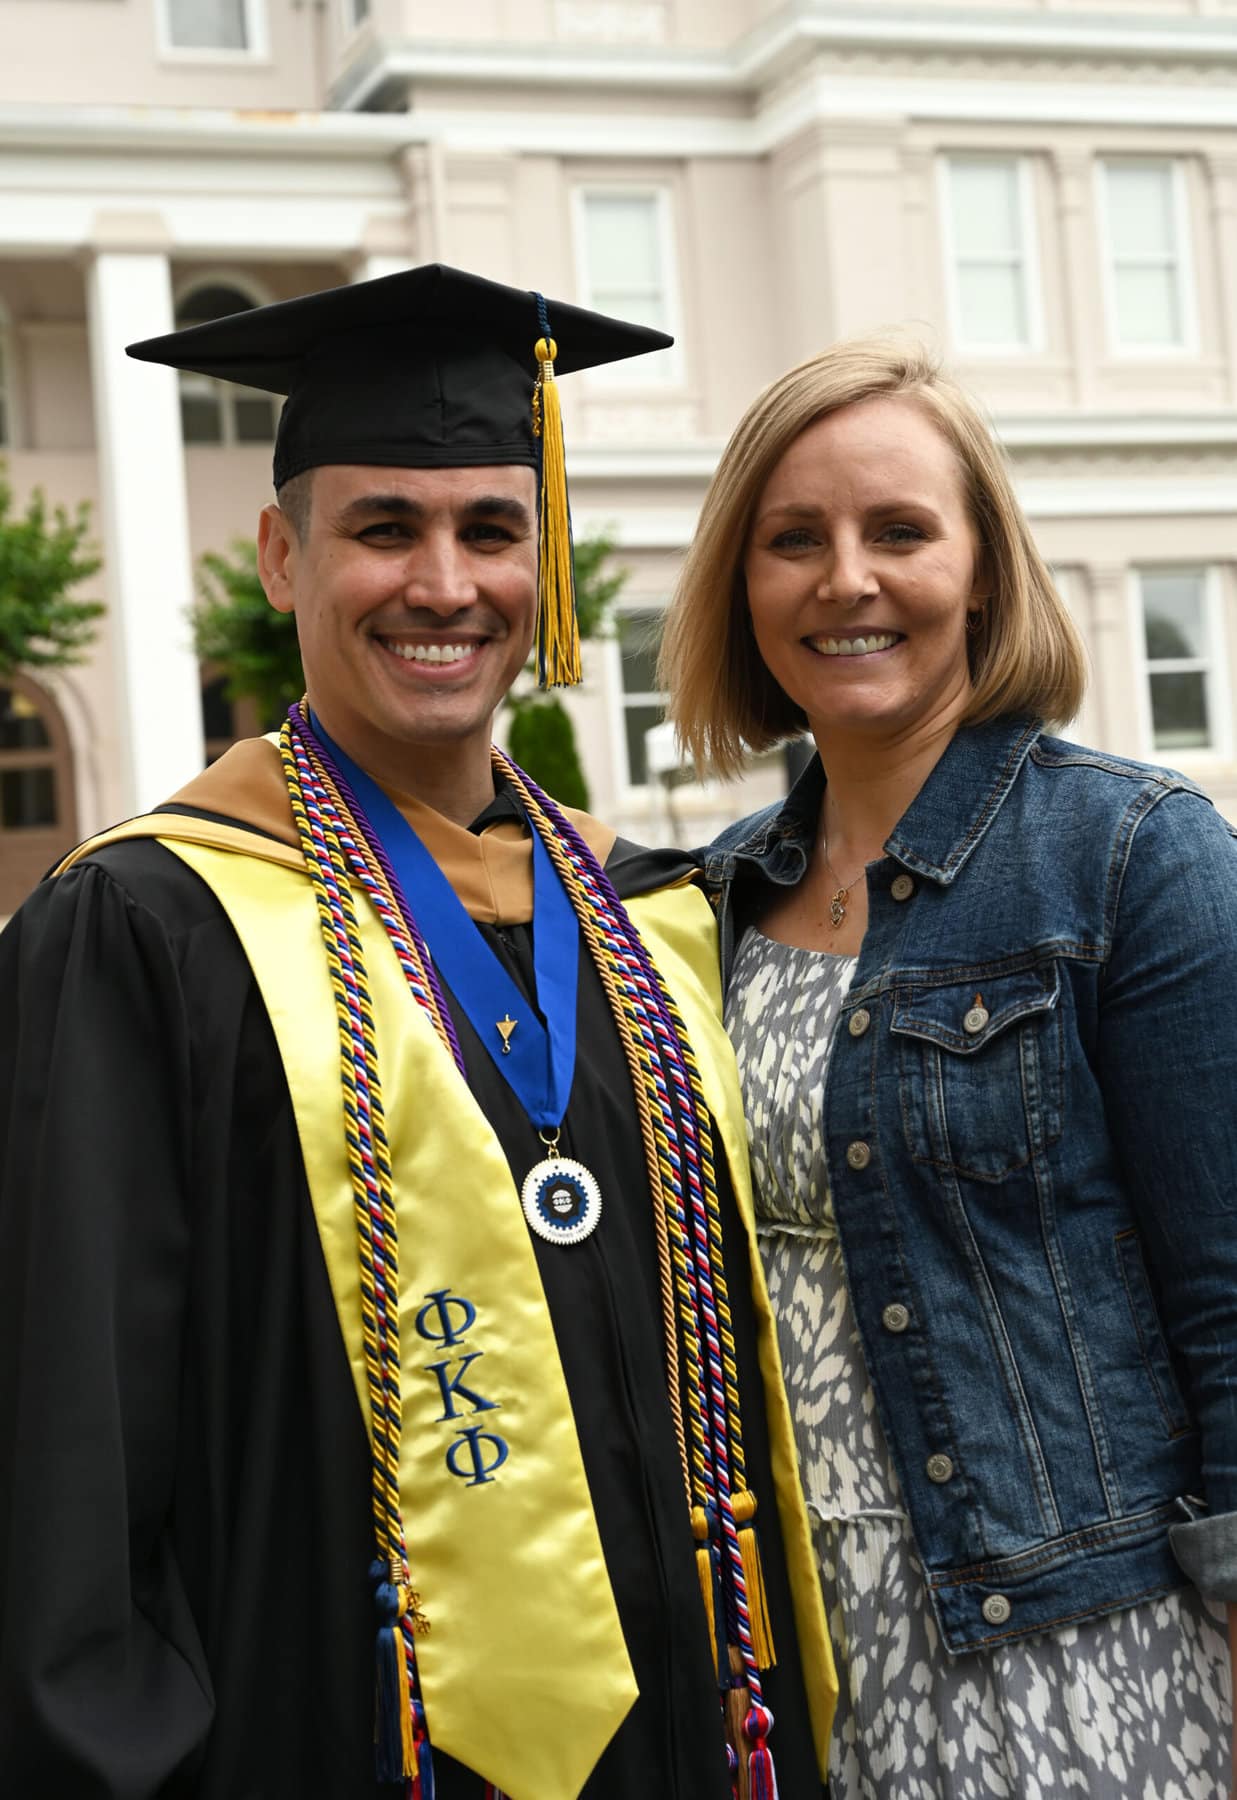 Gil Rodriguez and his wife after the university graduation